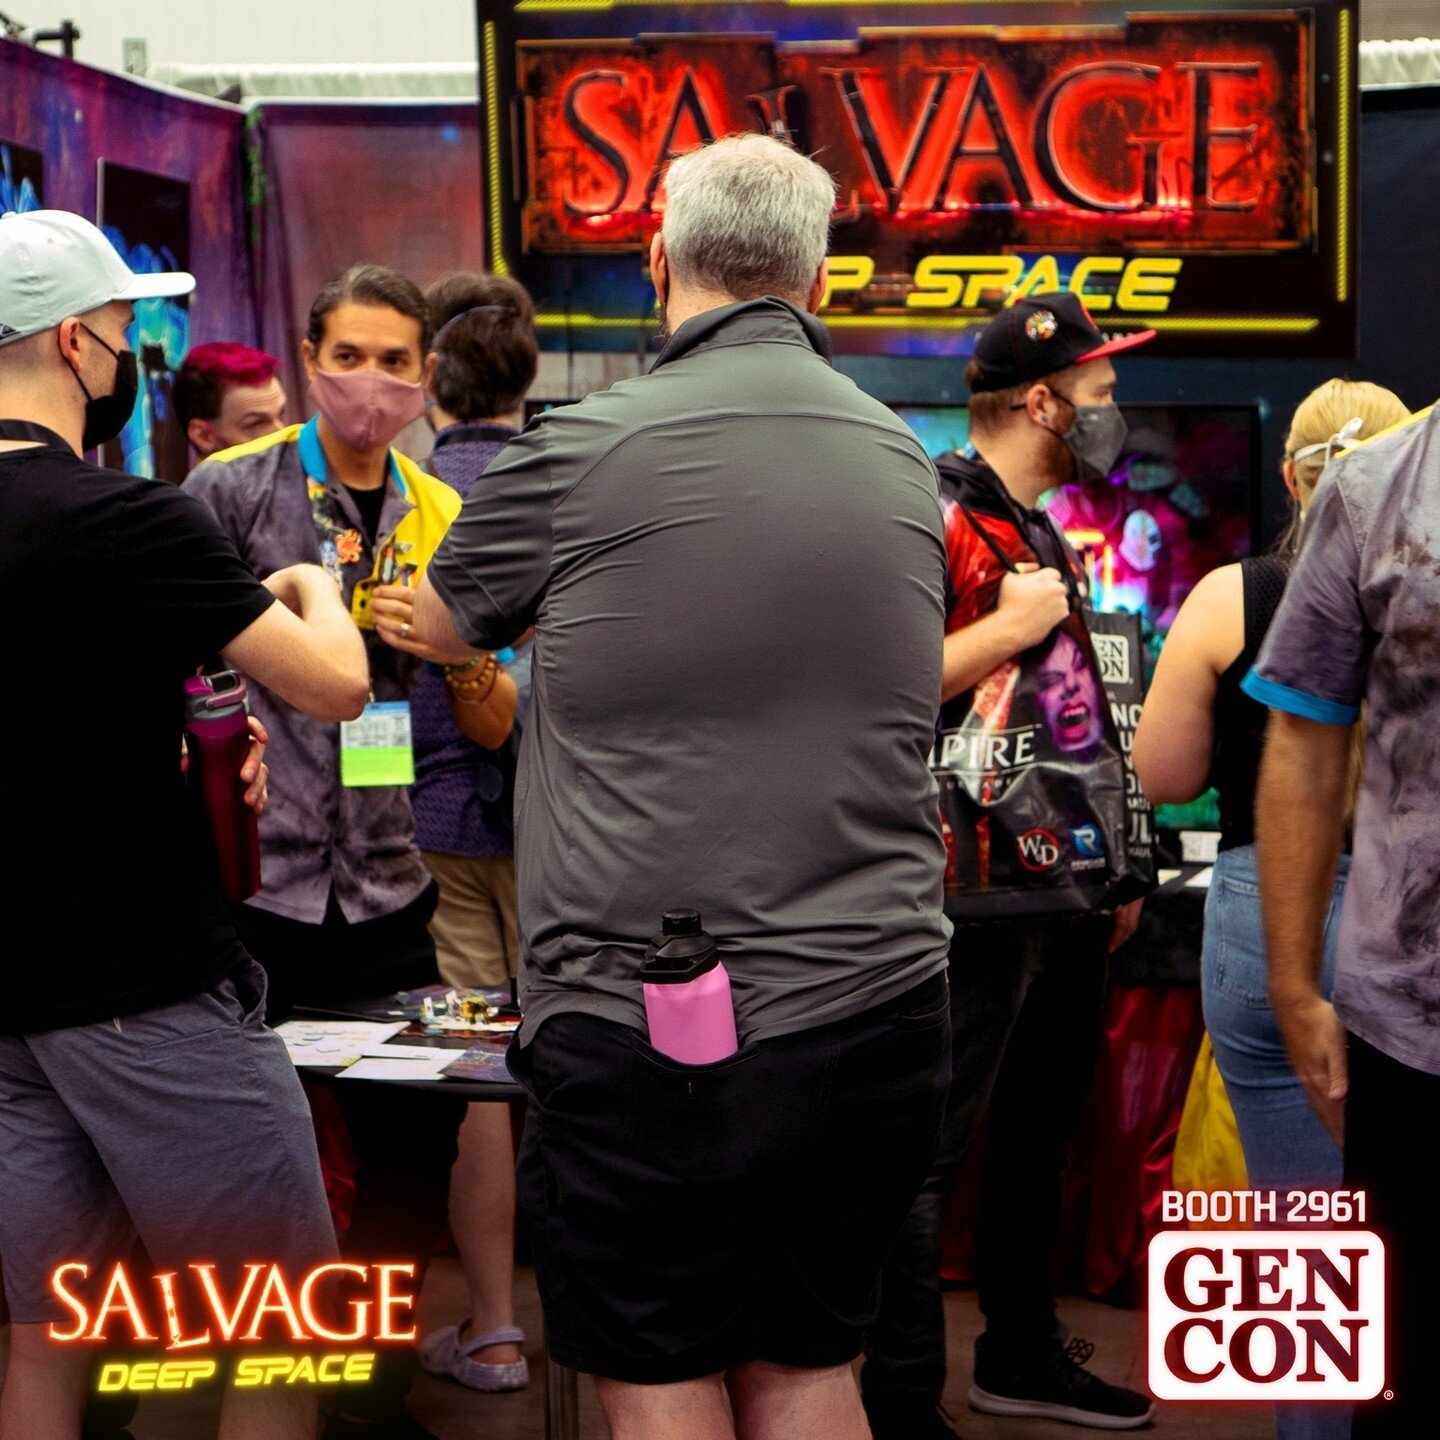 In case you missed us at #GenCon2022, here are some photos from our booth! We had an incredible time, and hope to make more friends next year! #SALVAGEDeepSpace #tabletopgaming #announcement #boardgames #exosuits #roleplaying #cyberpunk #game

Photos